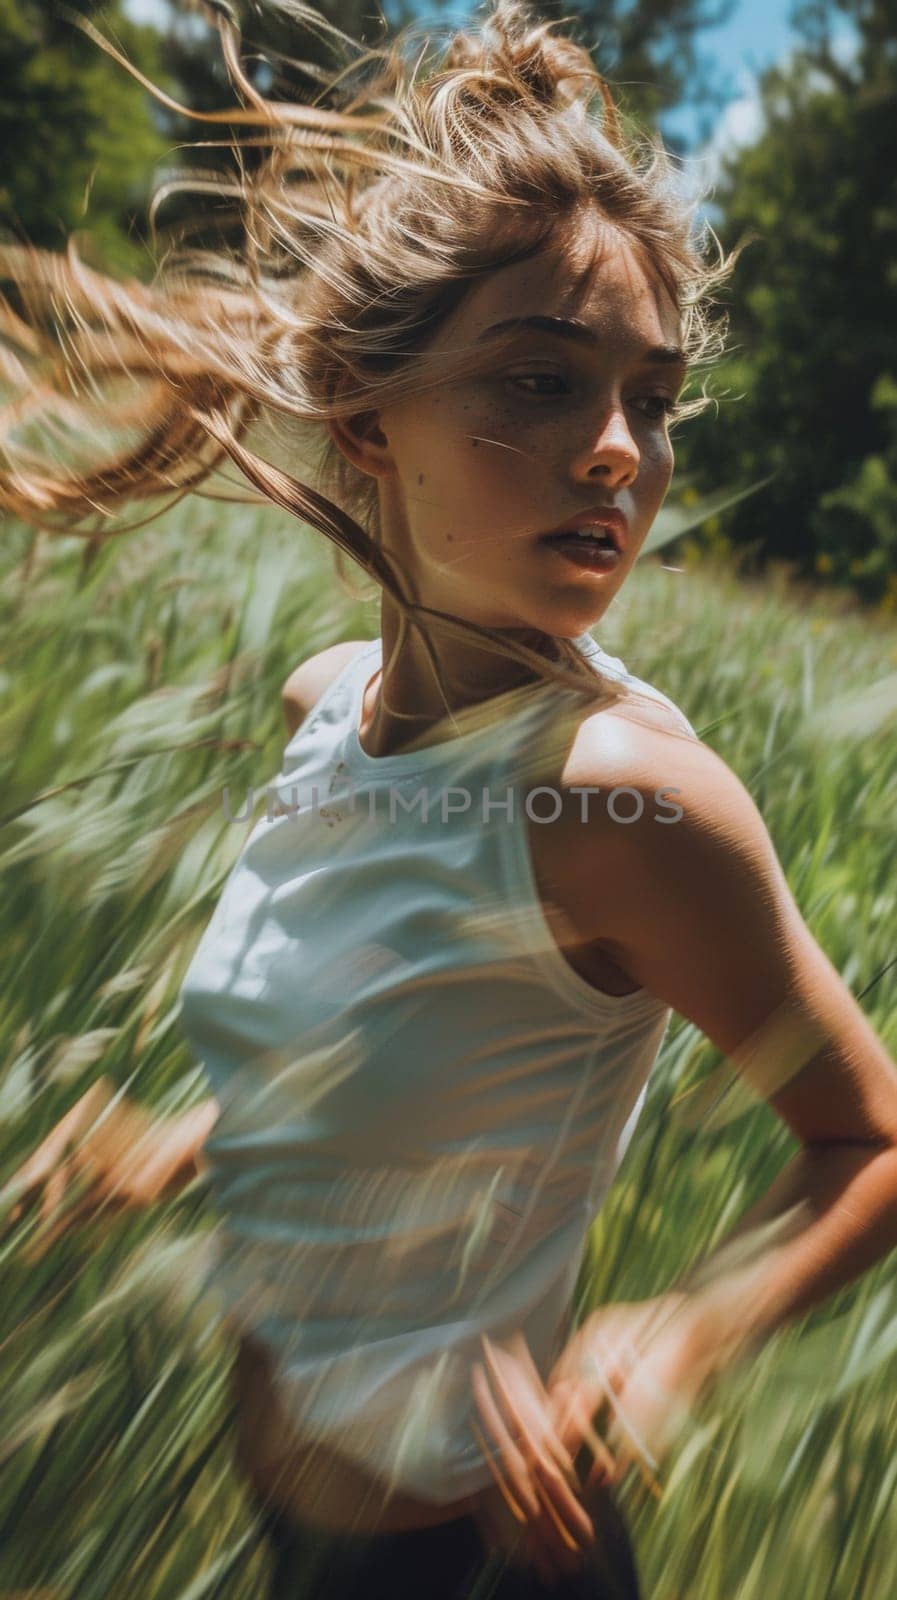 A woman running through a field of tall grass with her hair blowing, AI by starush